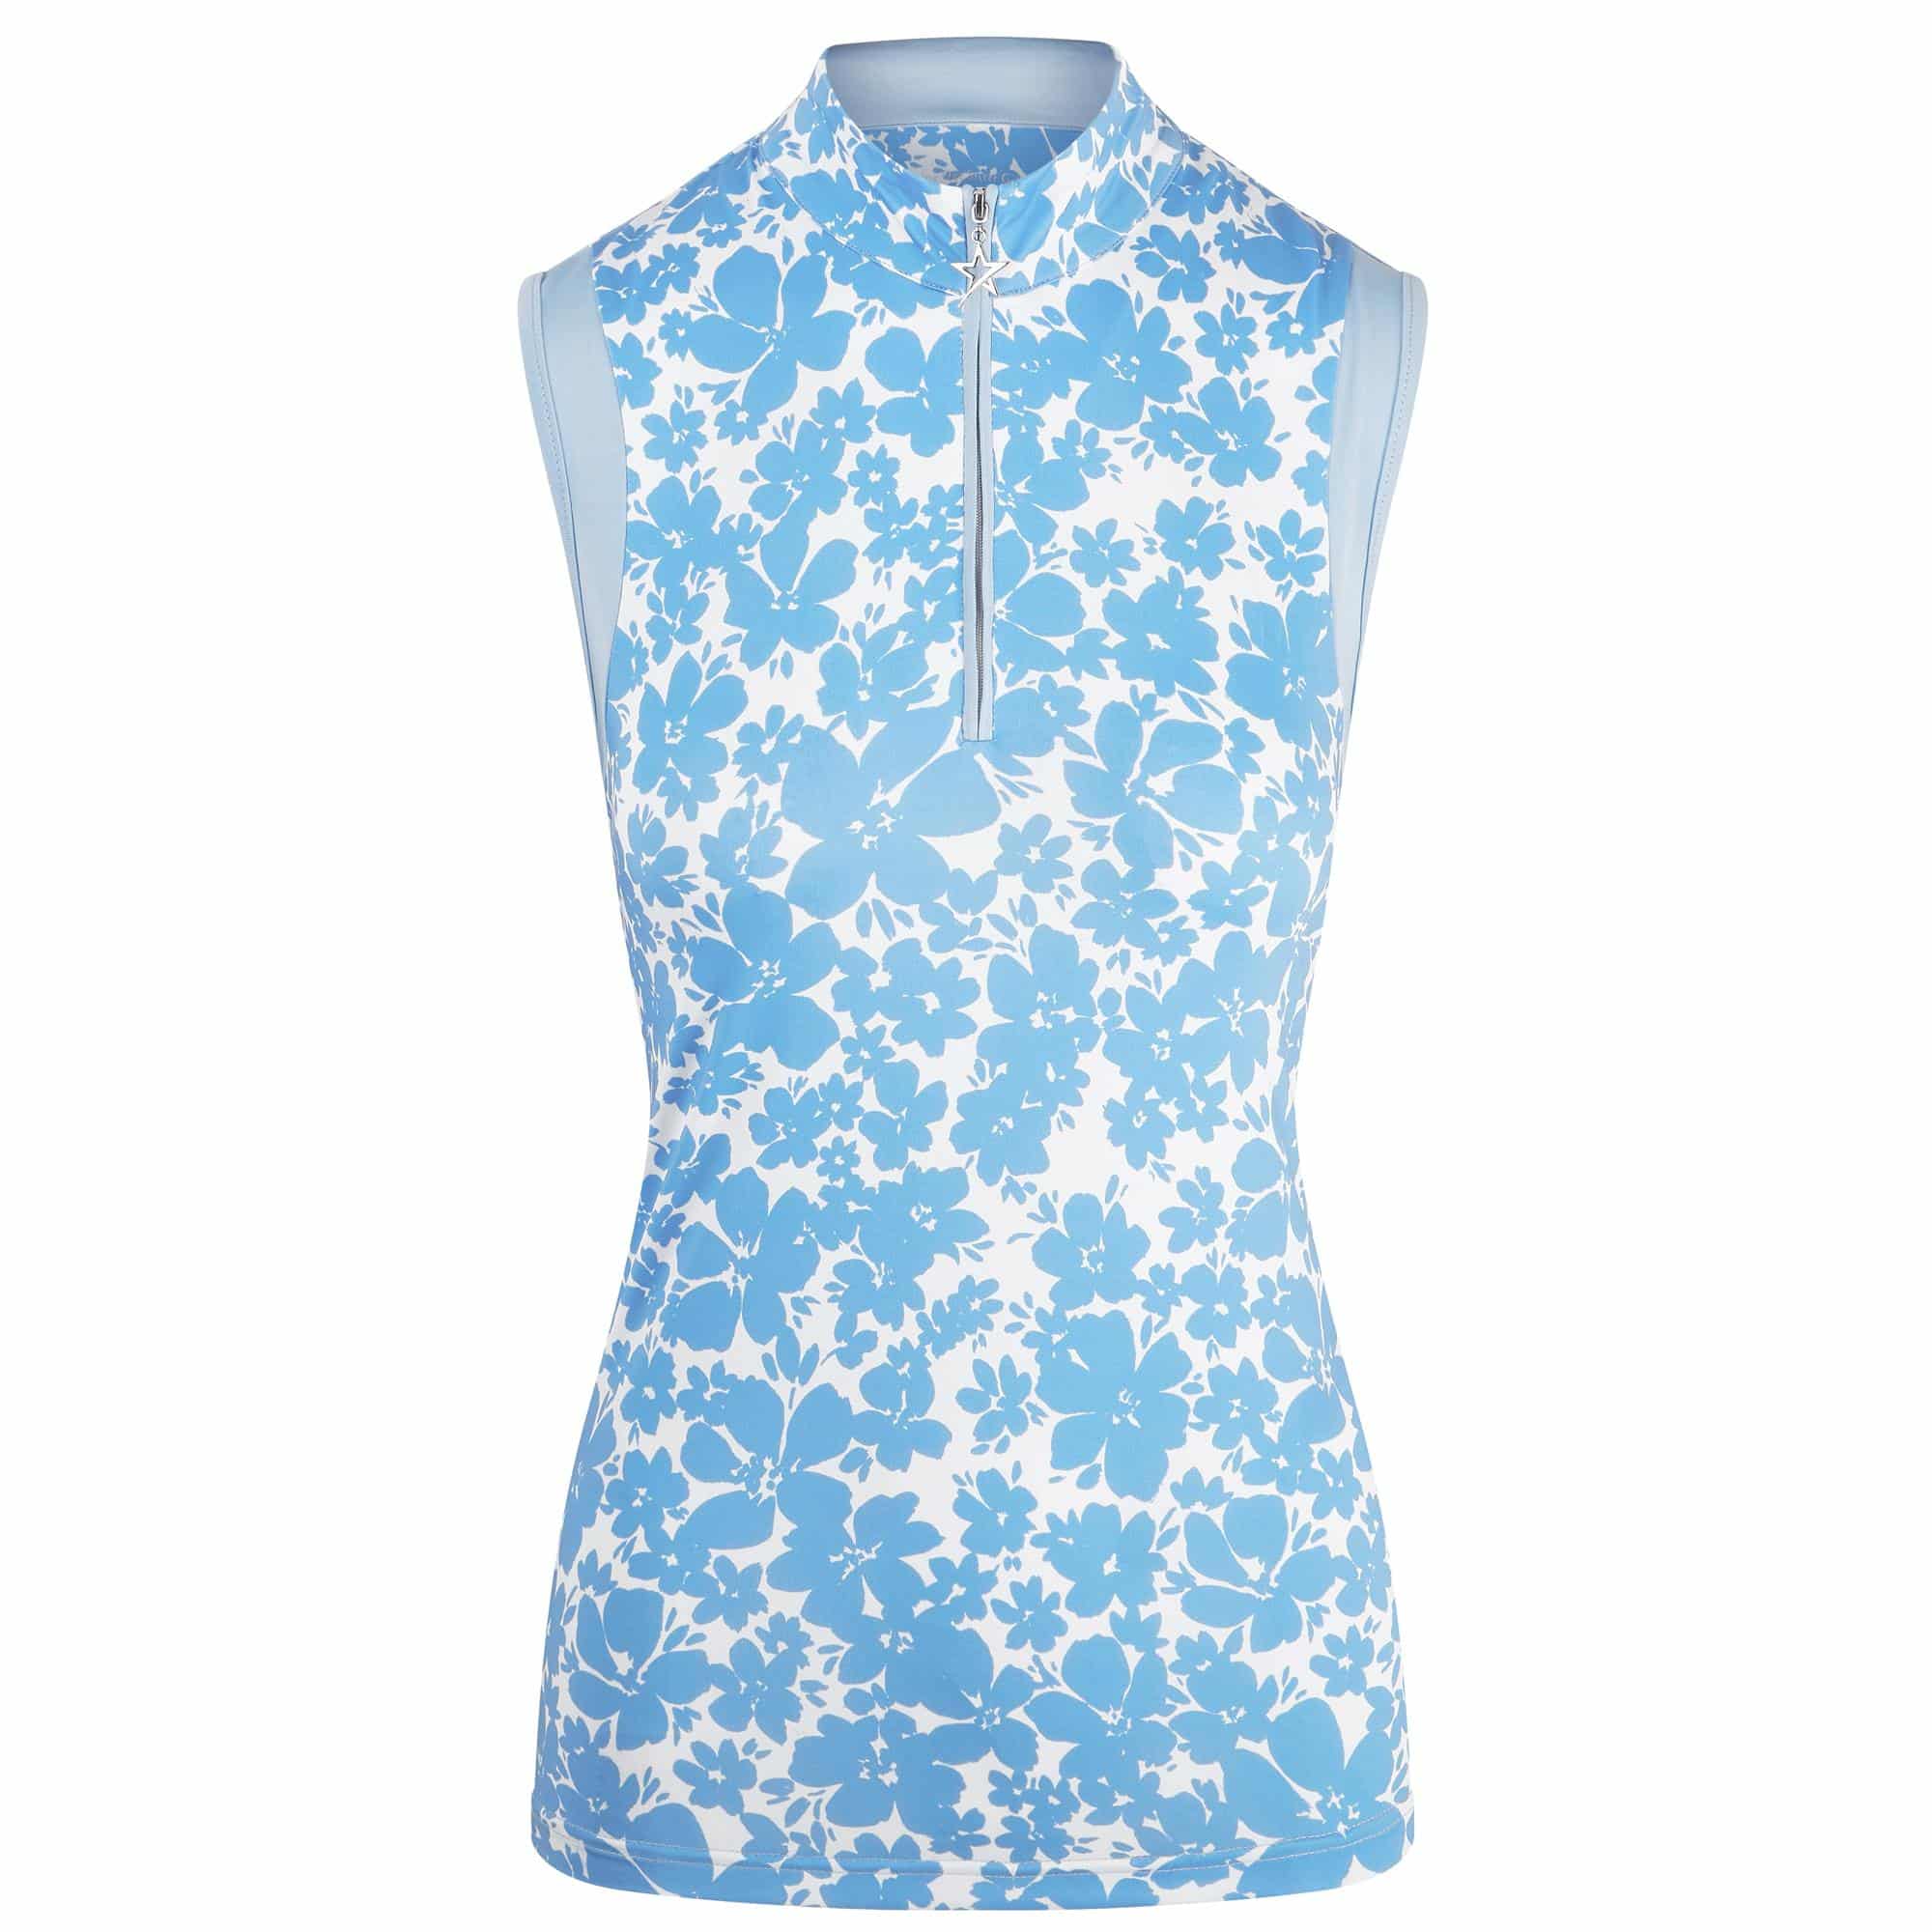 Swing Out Sister Serena Ladies Sleeveless Golf Polo Shirt Full Bloom